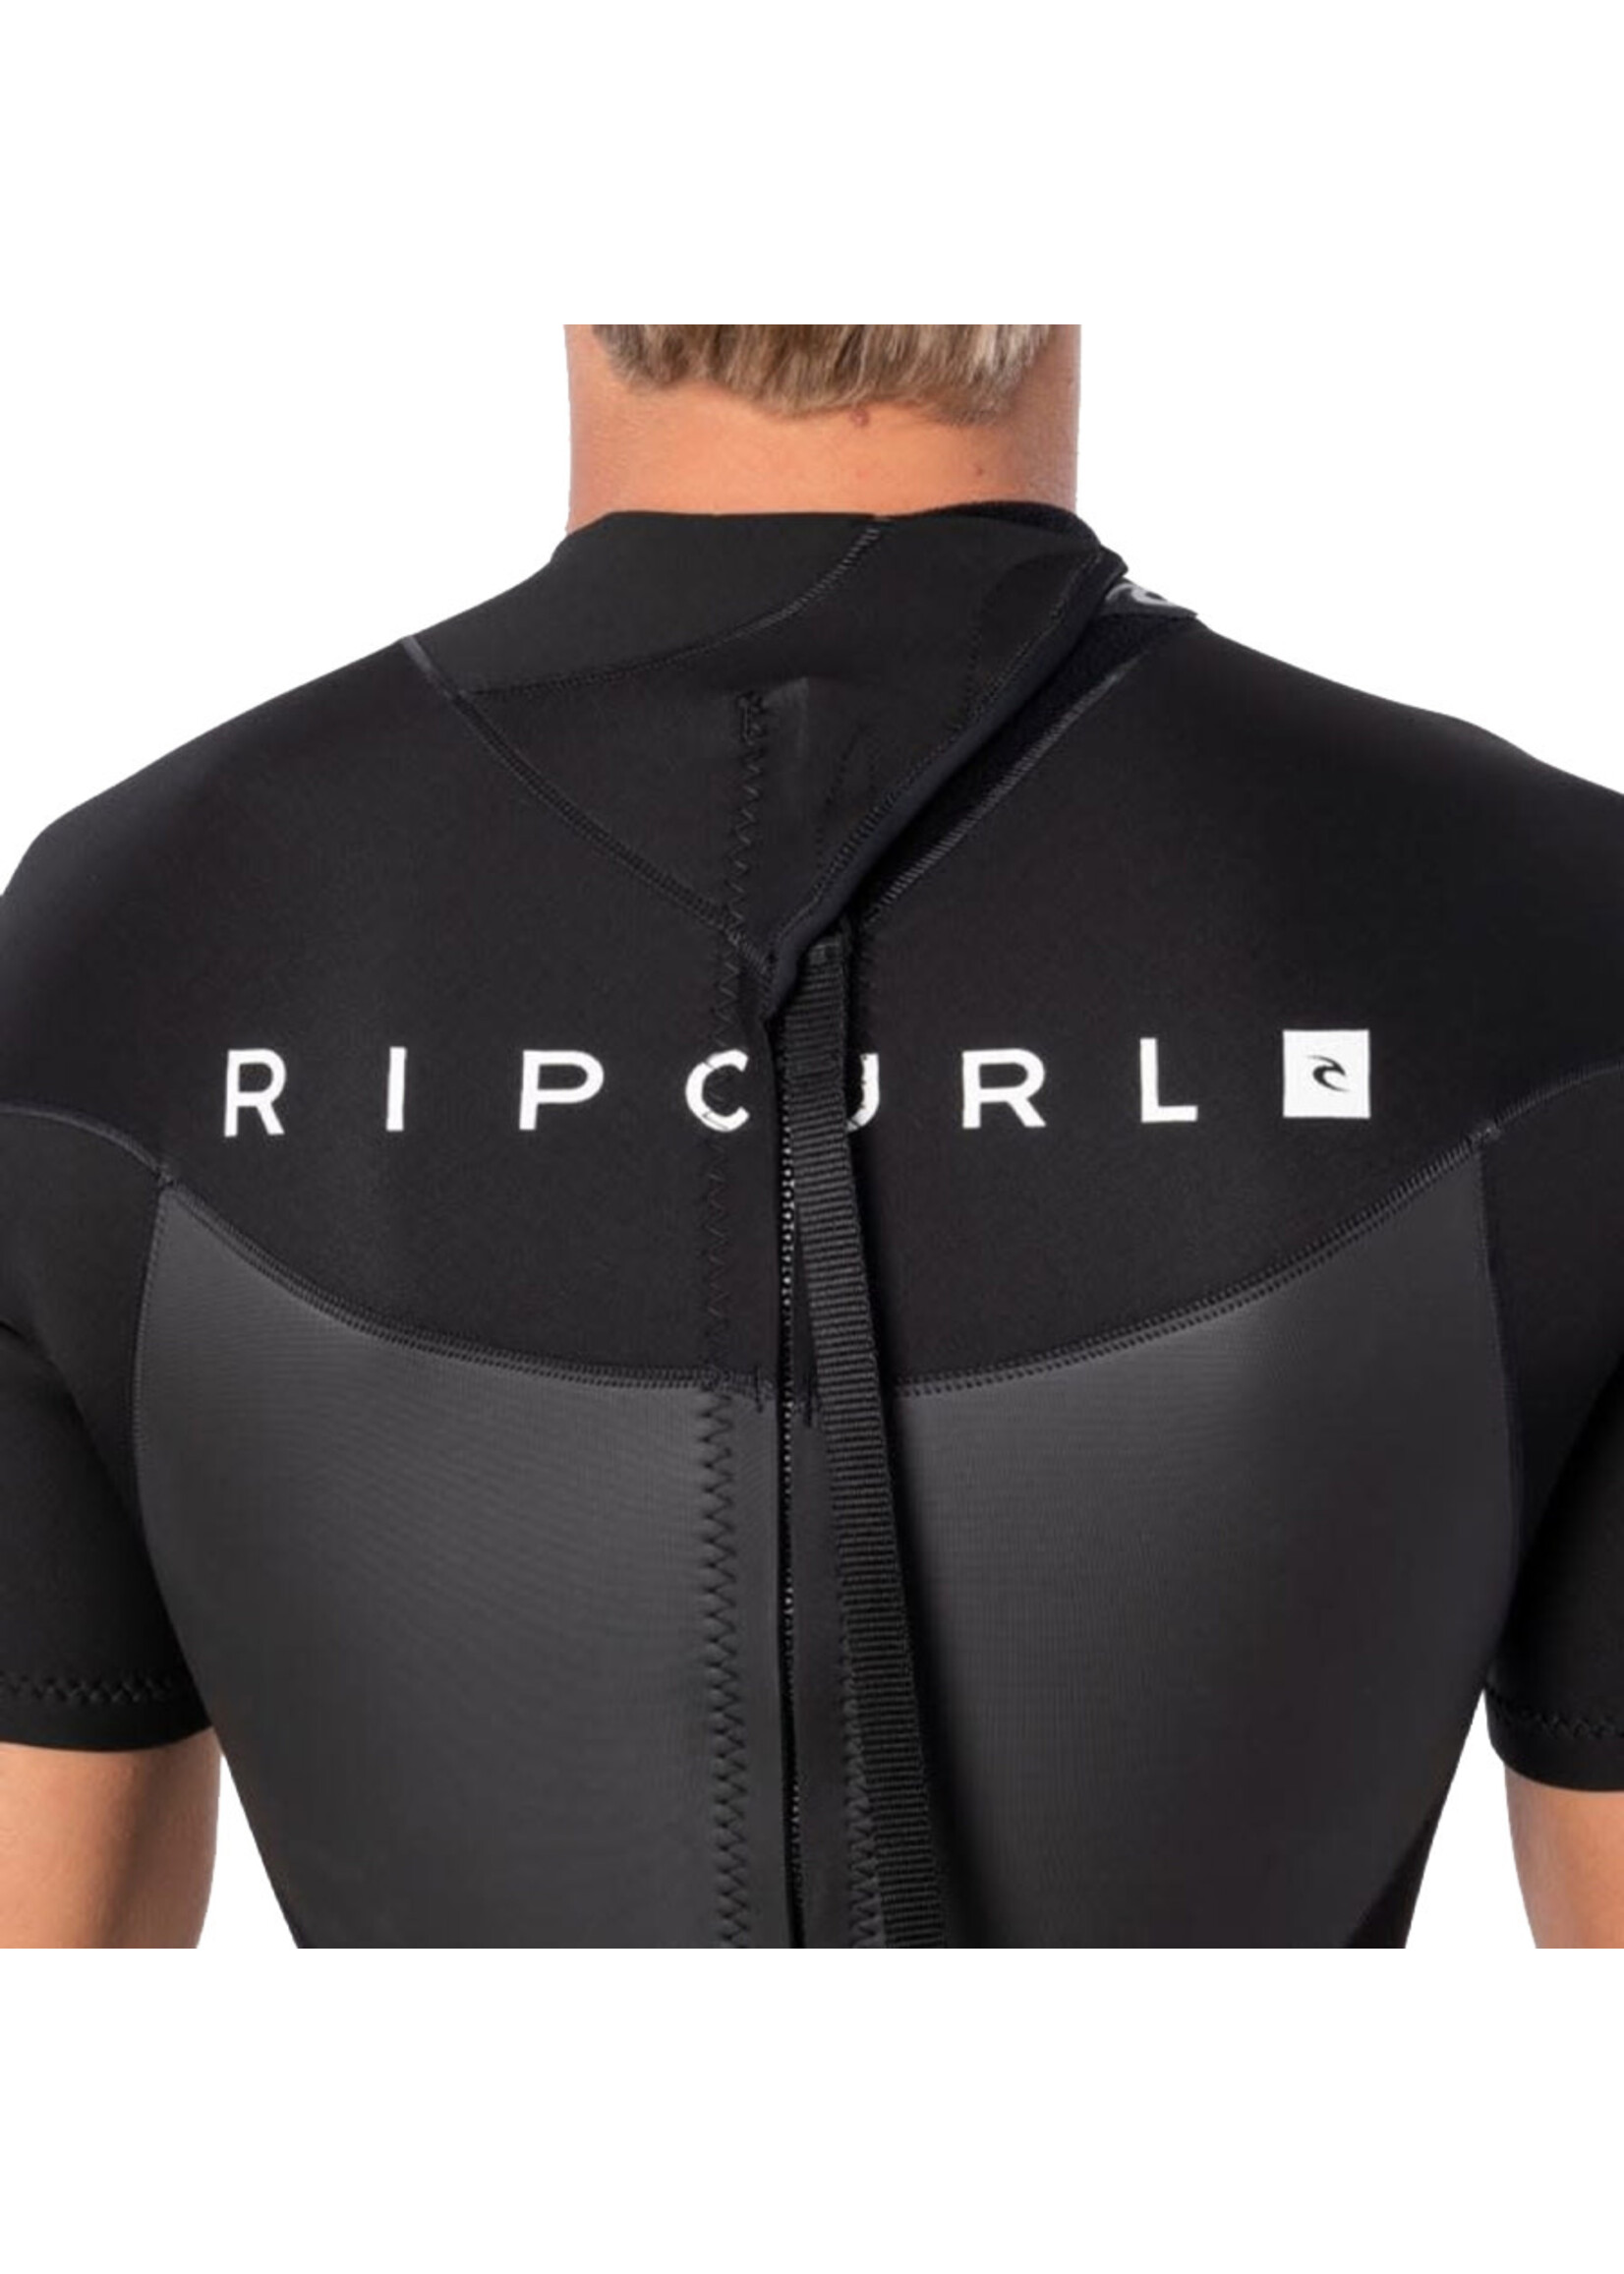 RIP CURL Wetsuit OMEGA 1.5MM (Homme)